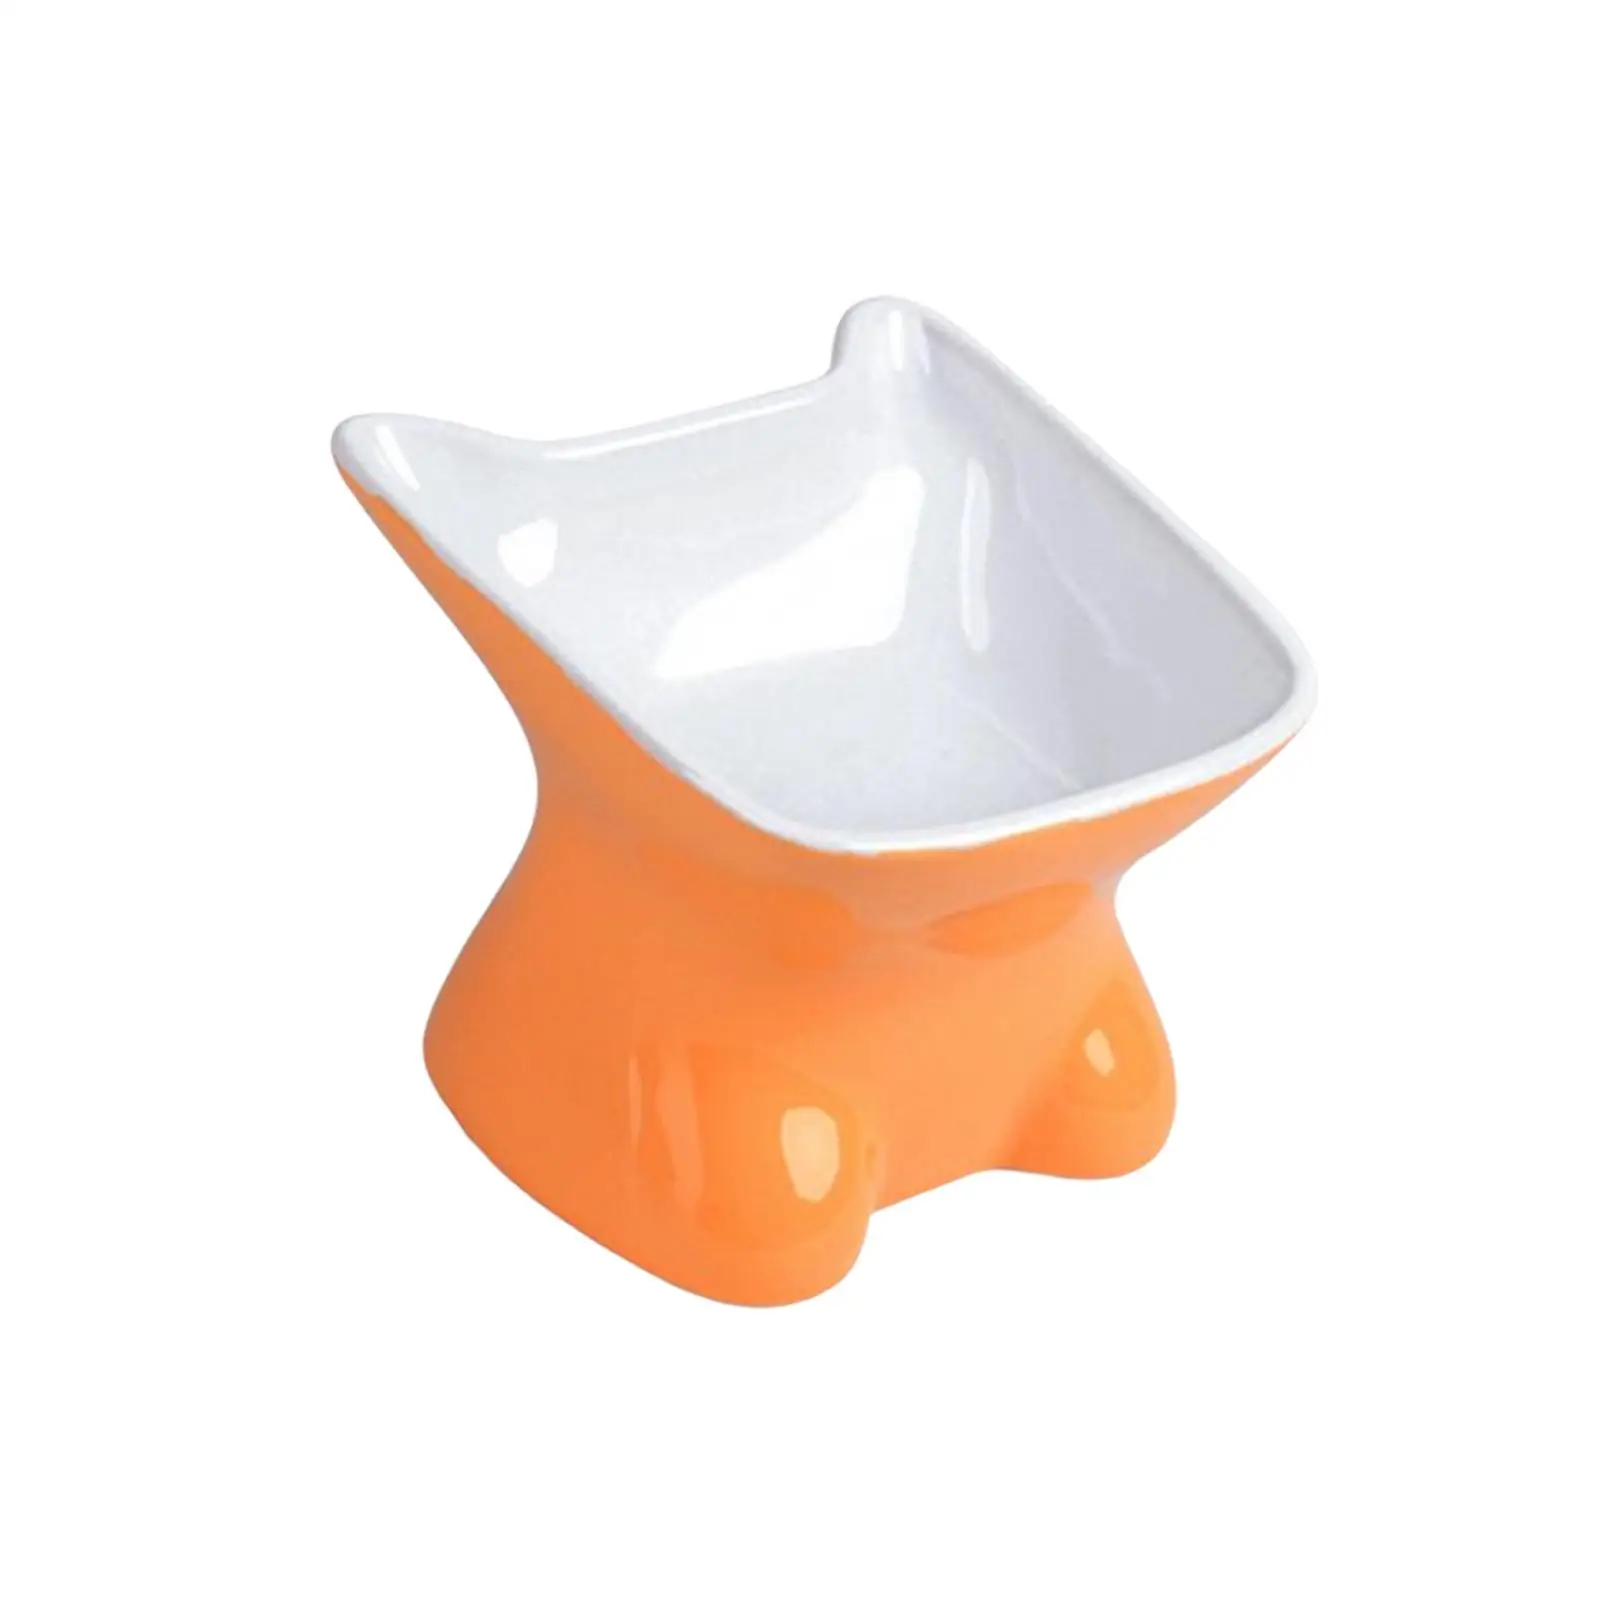 Raised Cat Food Bowl Pet Feeding Bowl Durable Protection Cervical Ceramic Raised Tilted Feeder Kitty Snack Bowl for Small Dogs